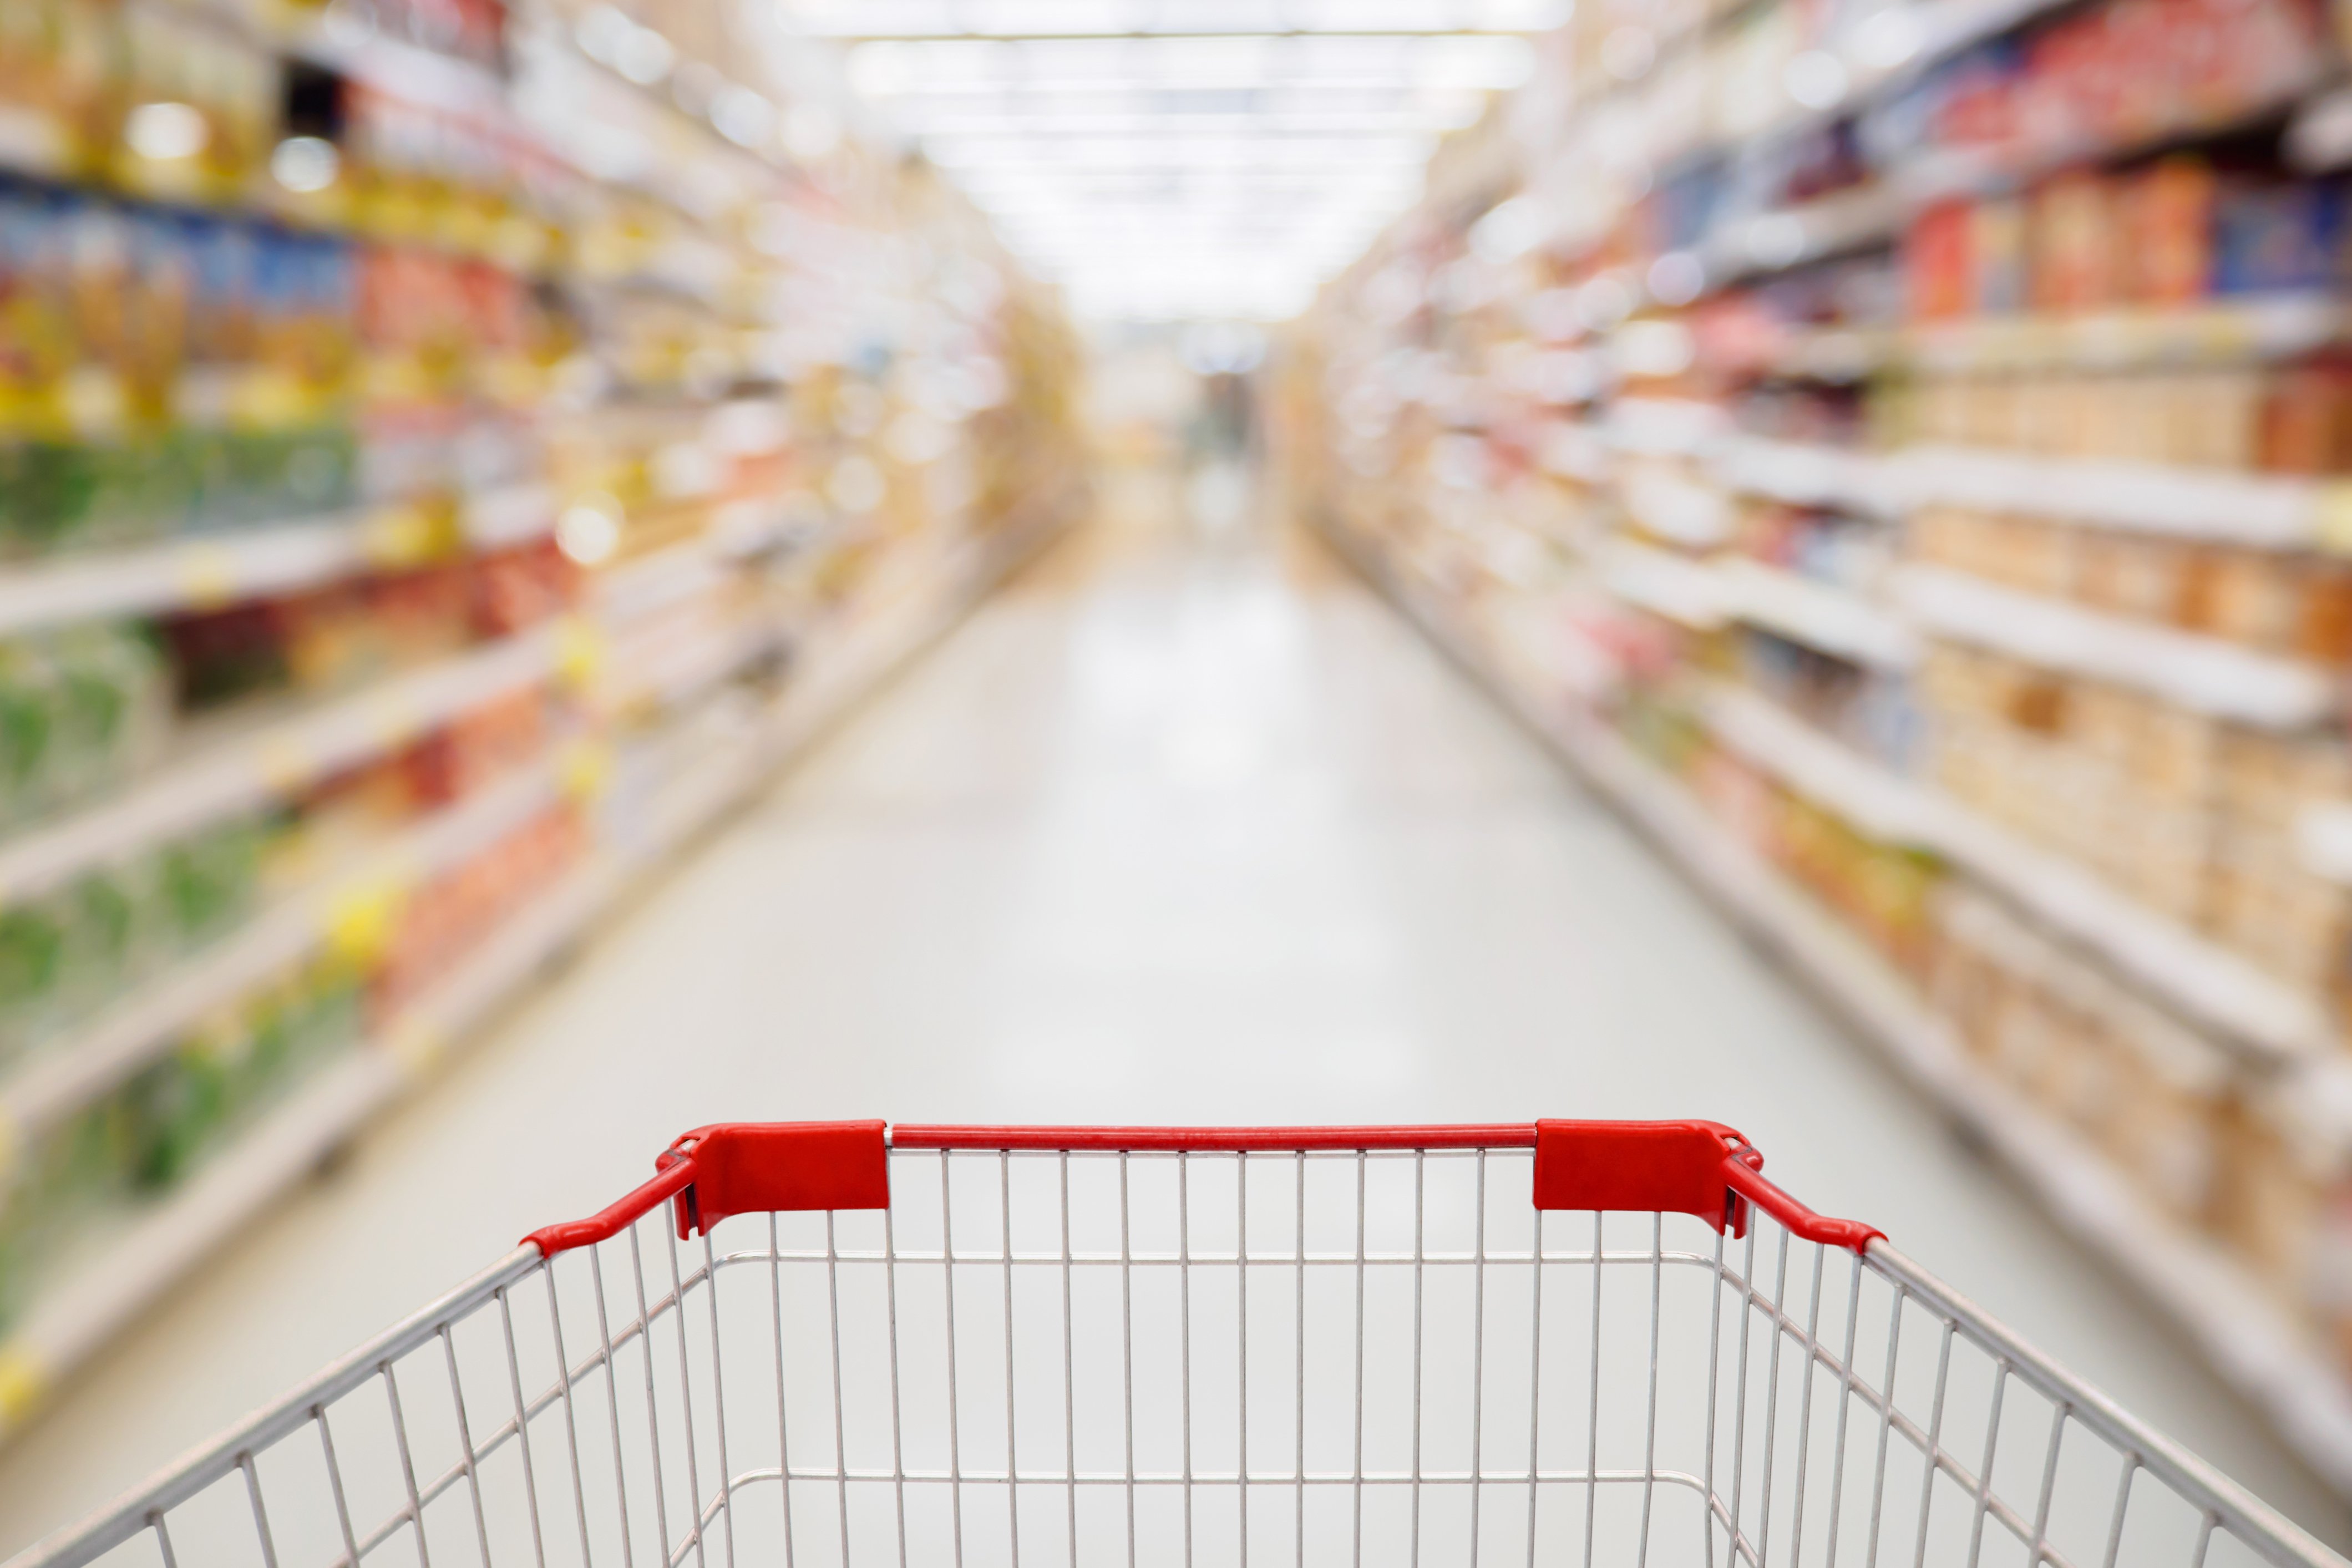 Shopping cart view in Supermarket aisle with product shelves abstract blur defocused background